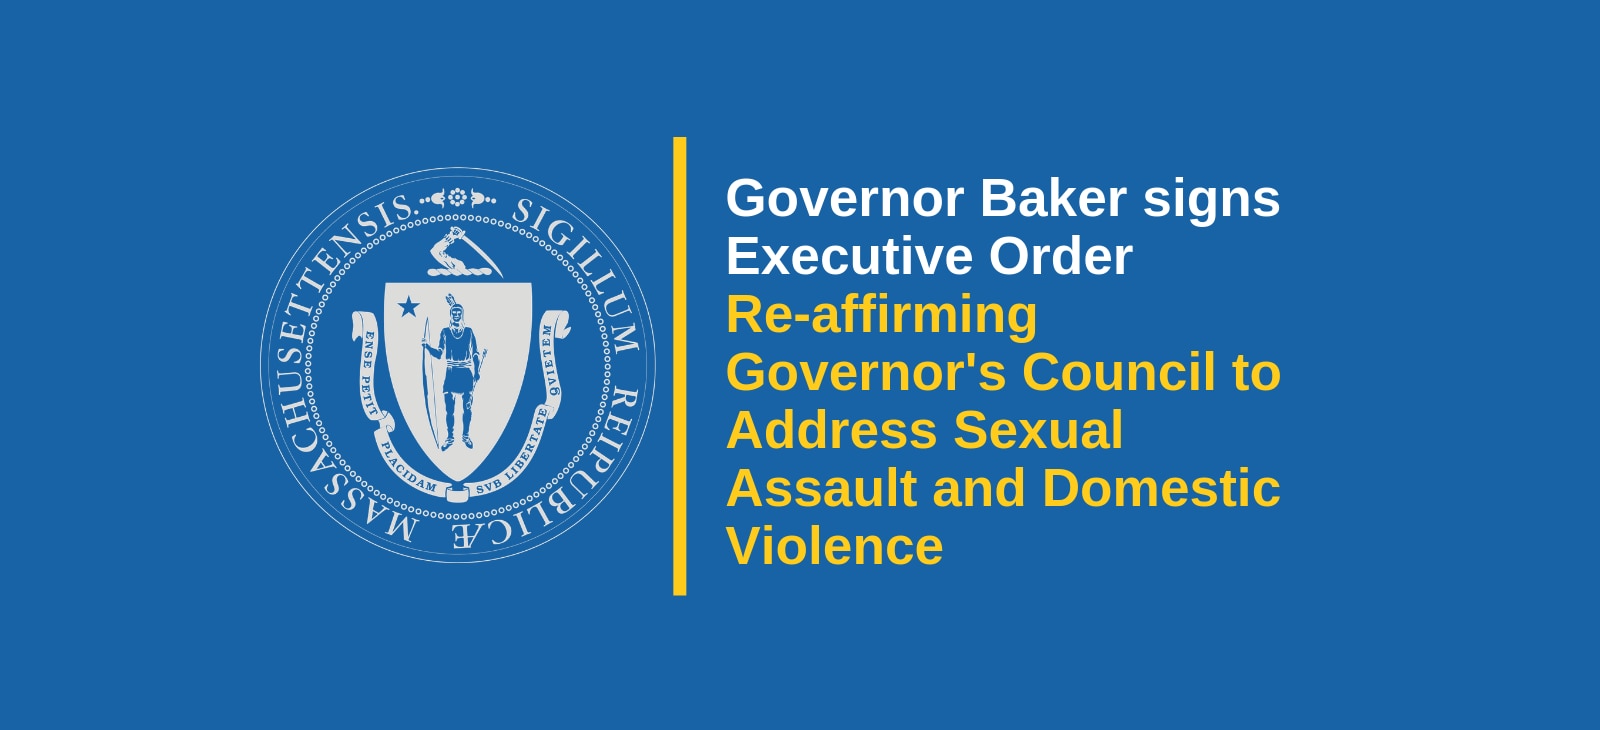 Governor Baker Signs Executive Order Reaffirming and Reconstituting the Governor's Council to Address Sexual Assault and Domestic Violence